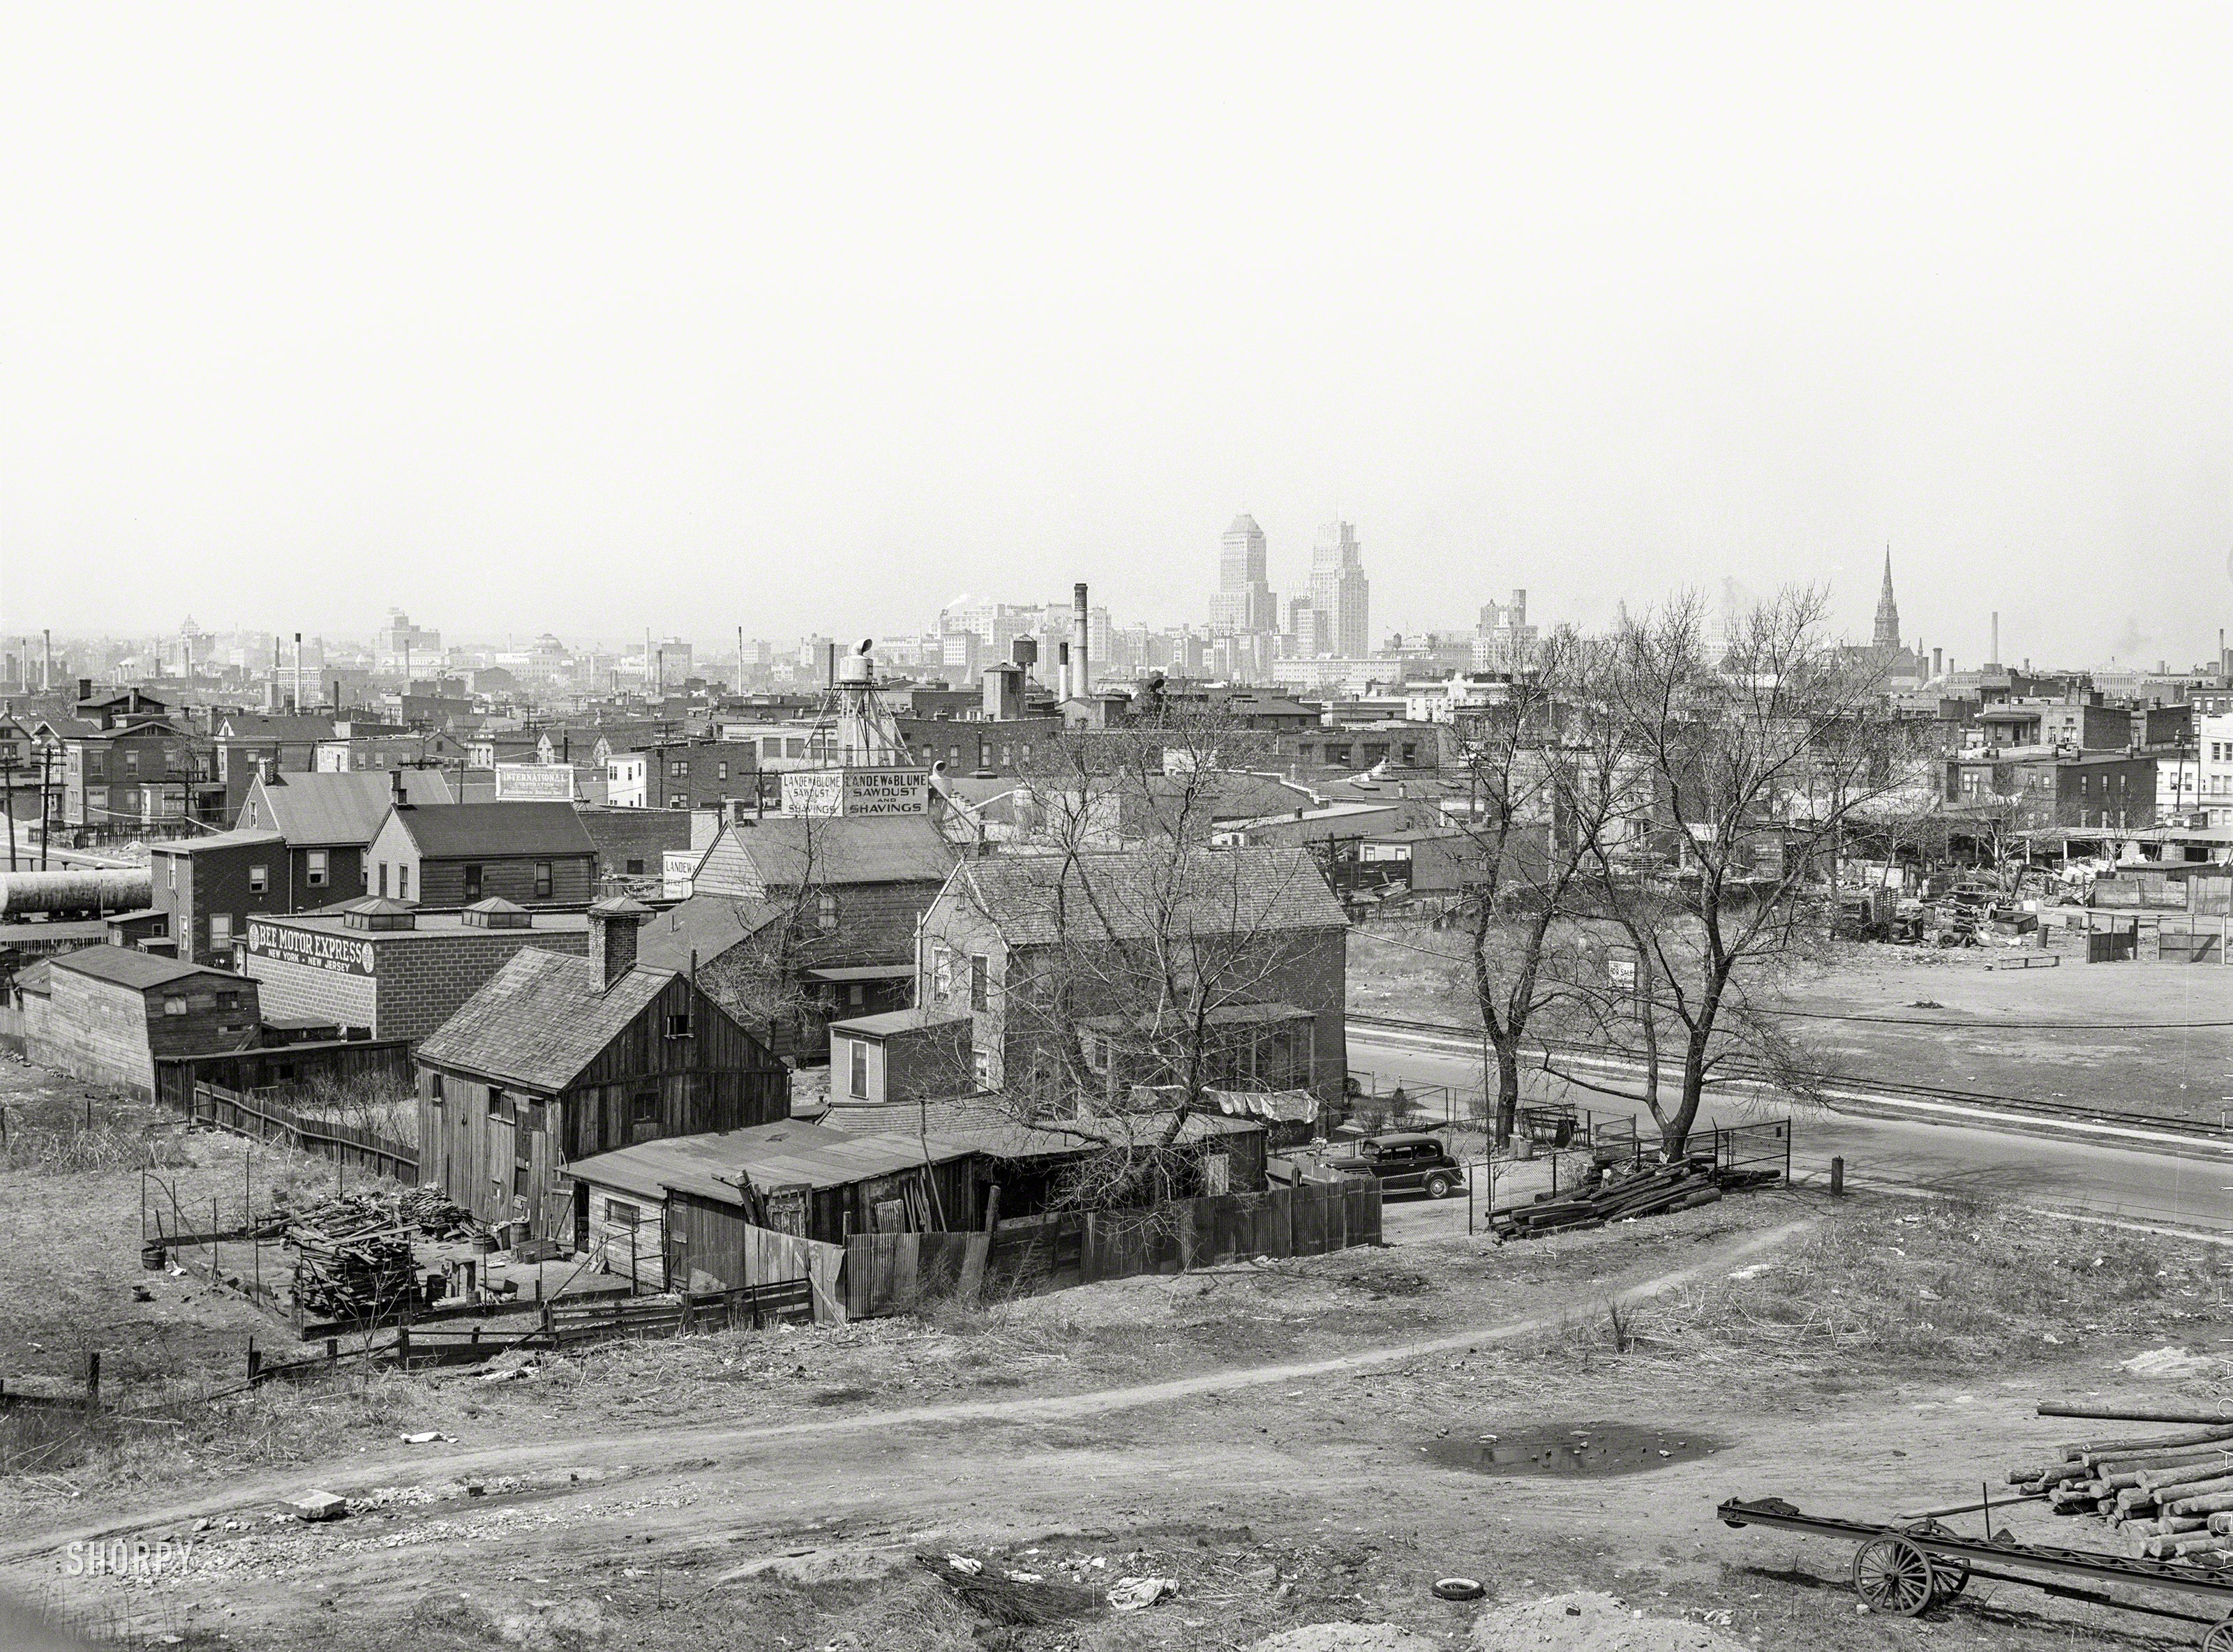 April 1939. "Slums. Newark, New Jersey." Medium format negative by Arthur Rothstein for the Farm Security Administration. View full size.